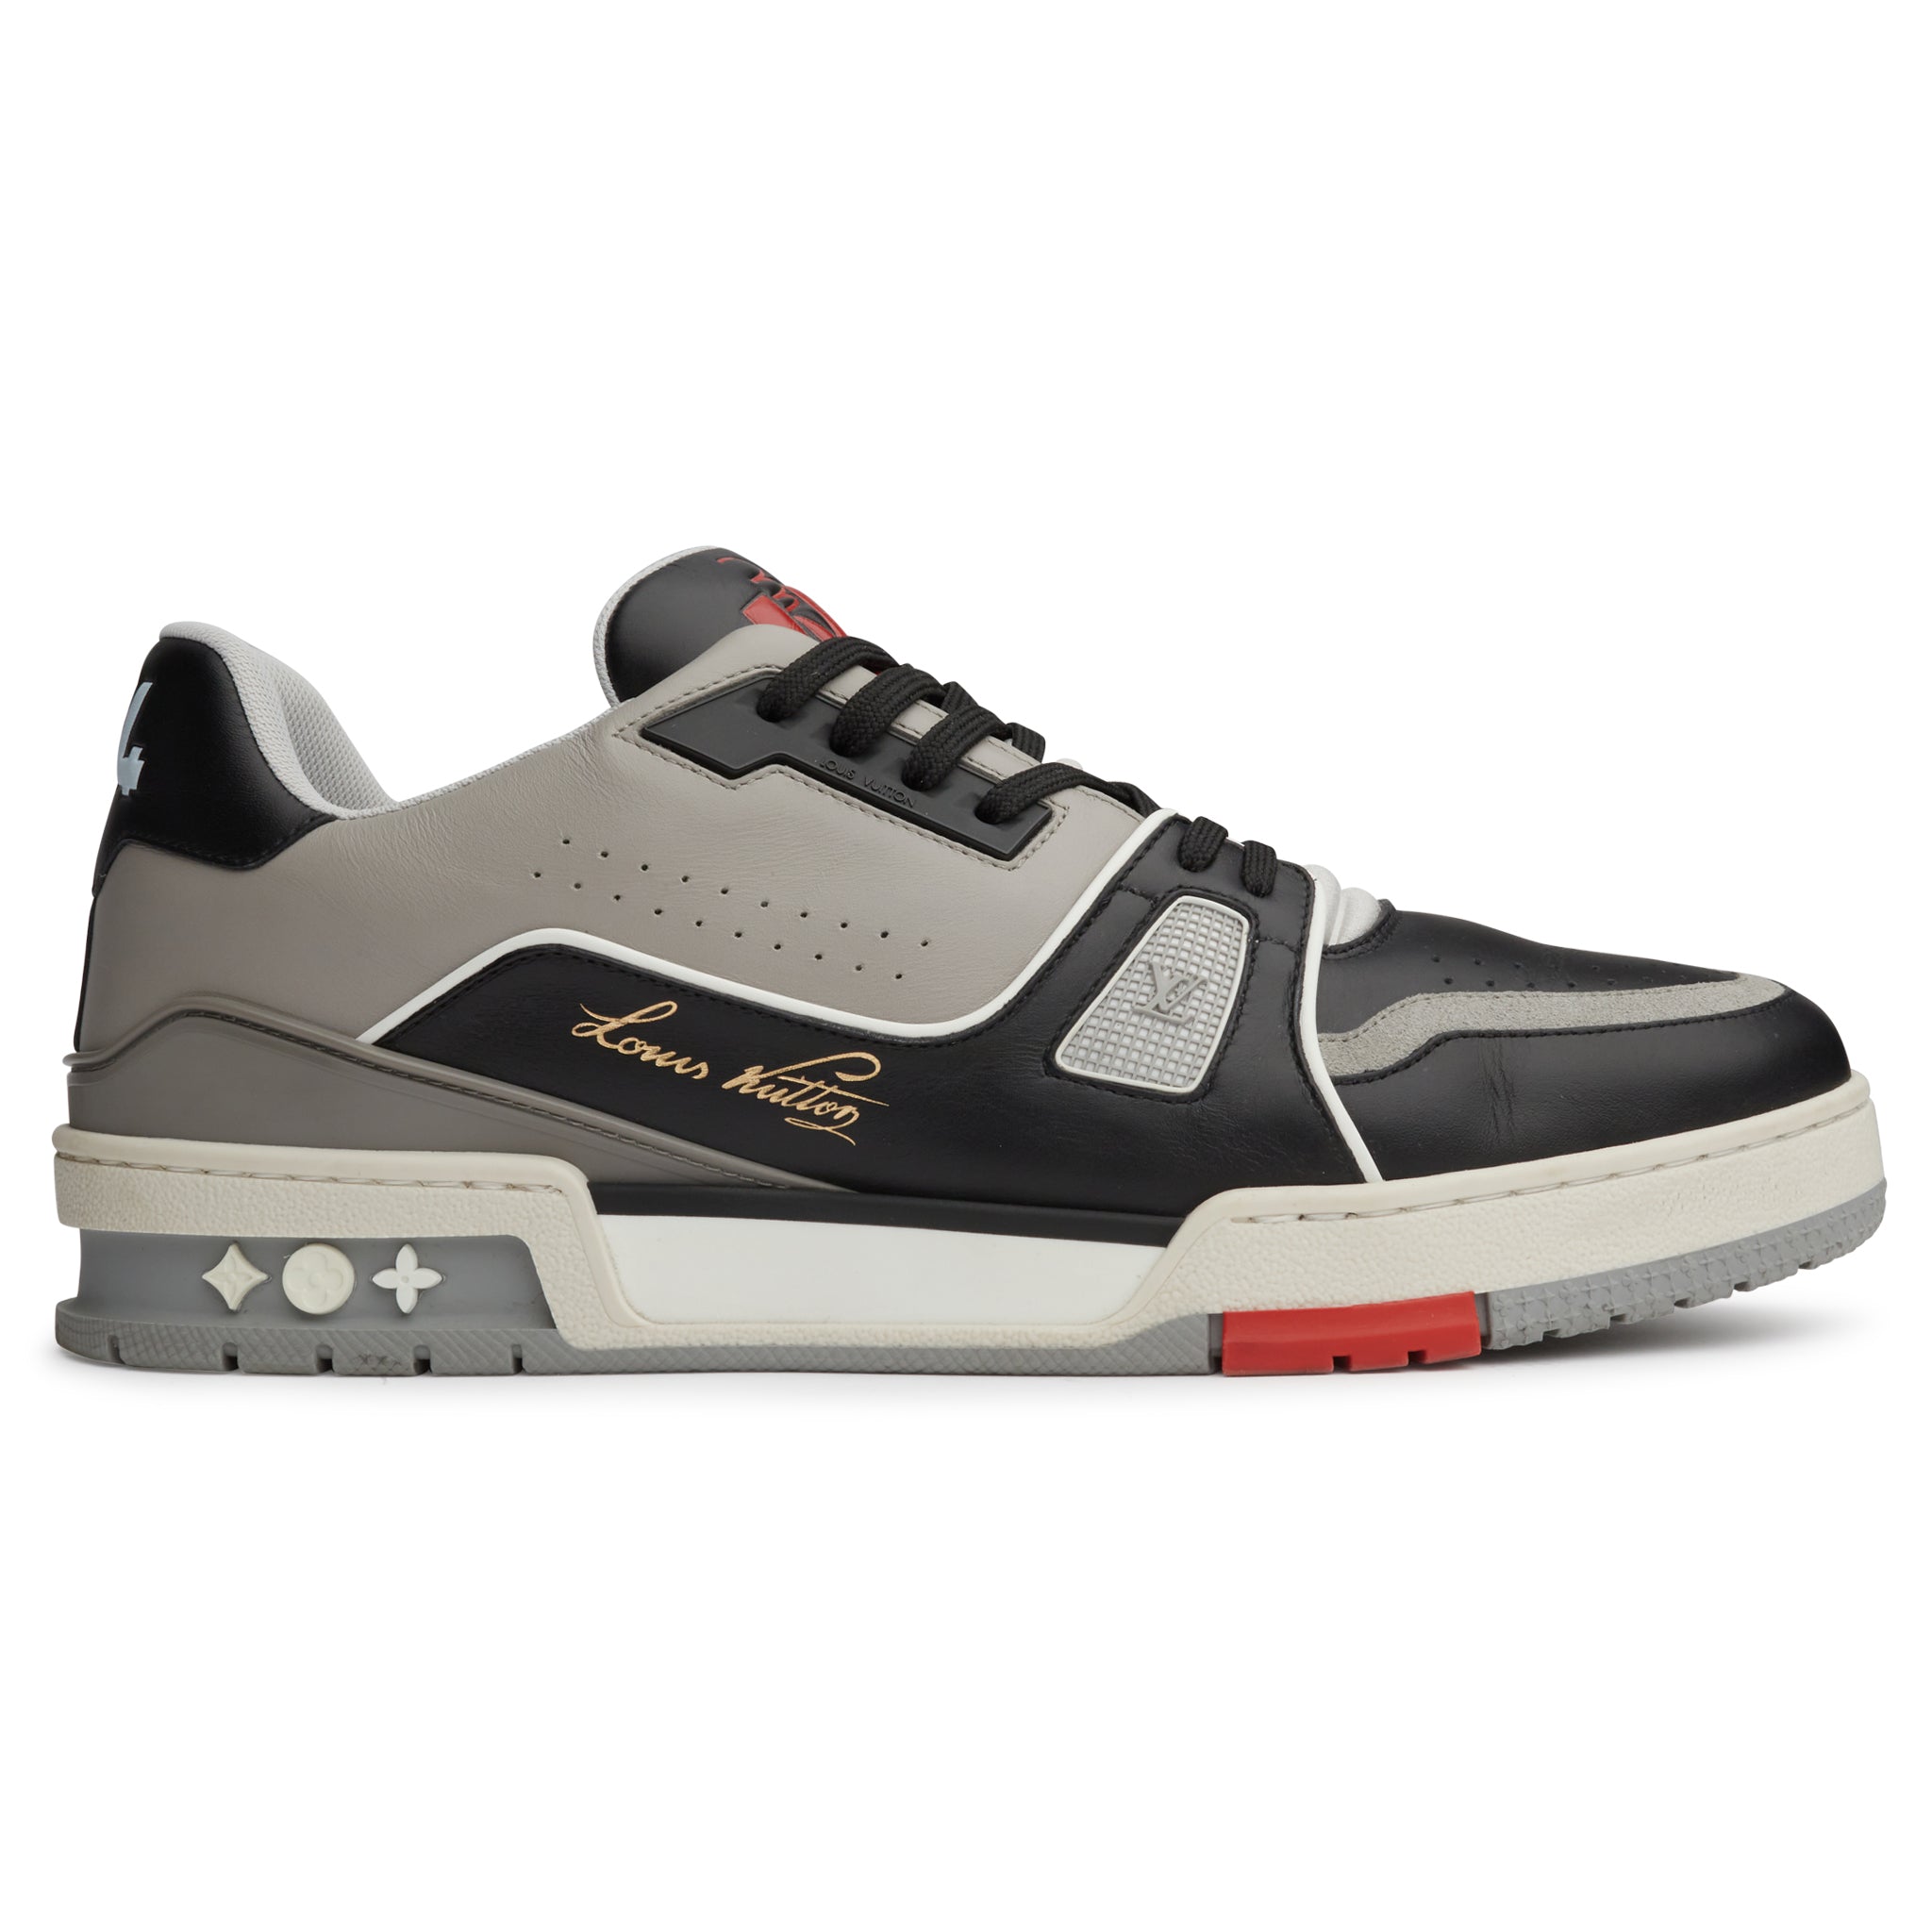 Image of Pre Owned - Louis Vuitton LV '54' Trainer Black Grey Sneaker